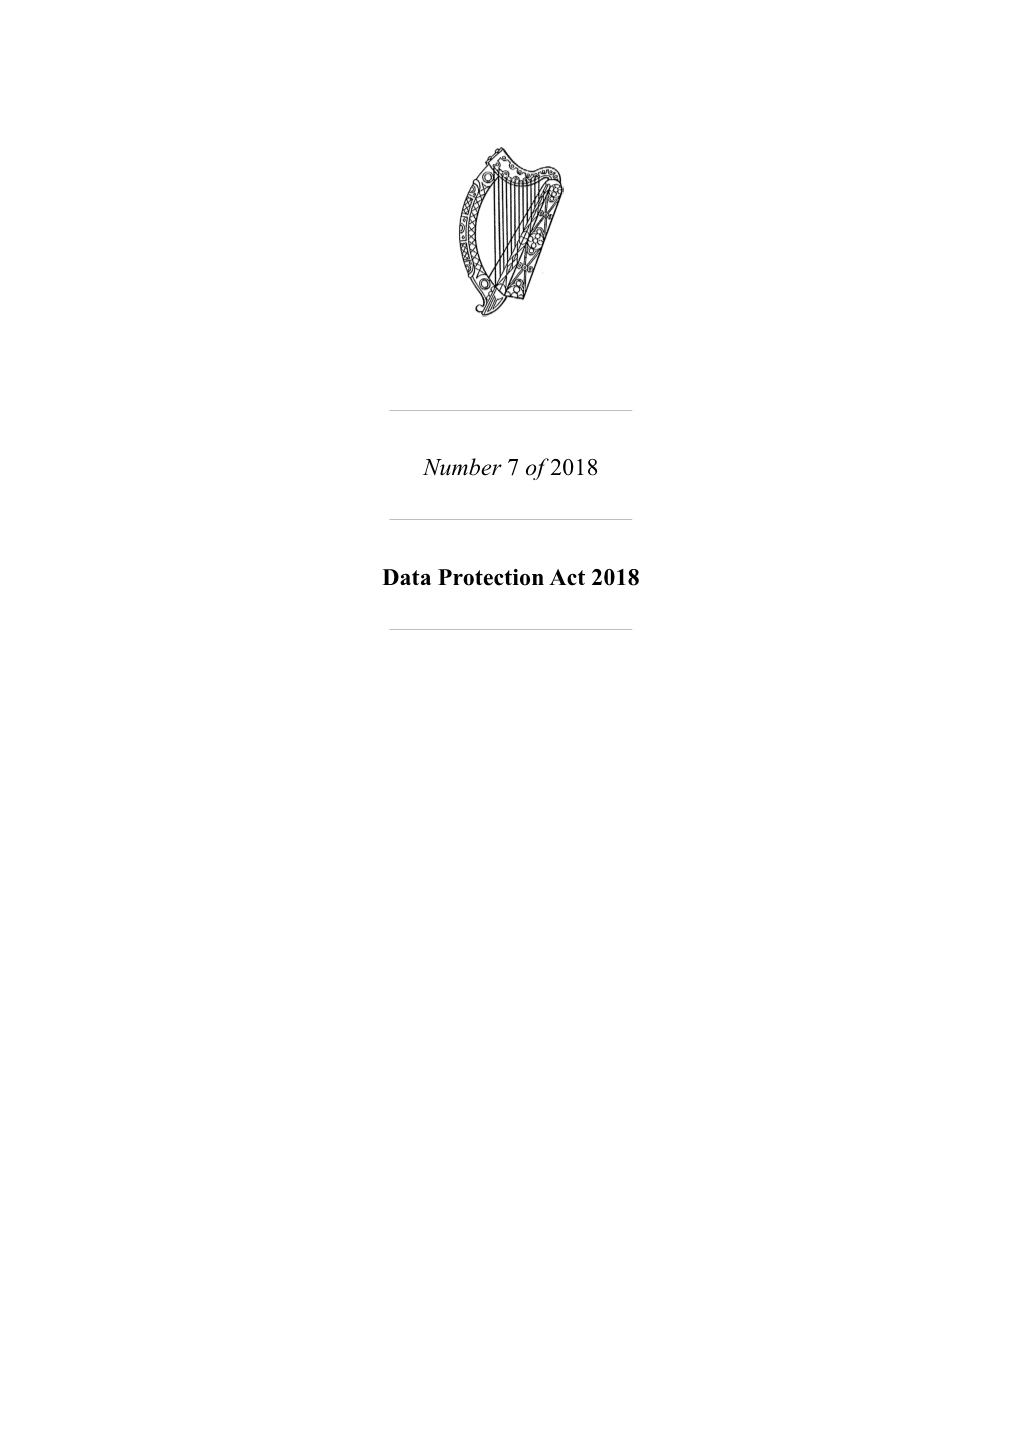 Number 7 of 2018 Data Protection Act 2018